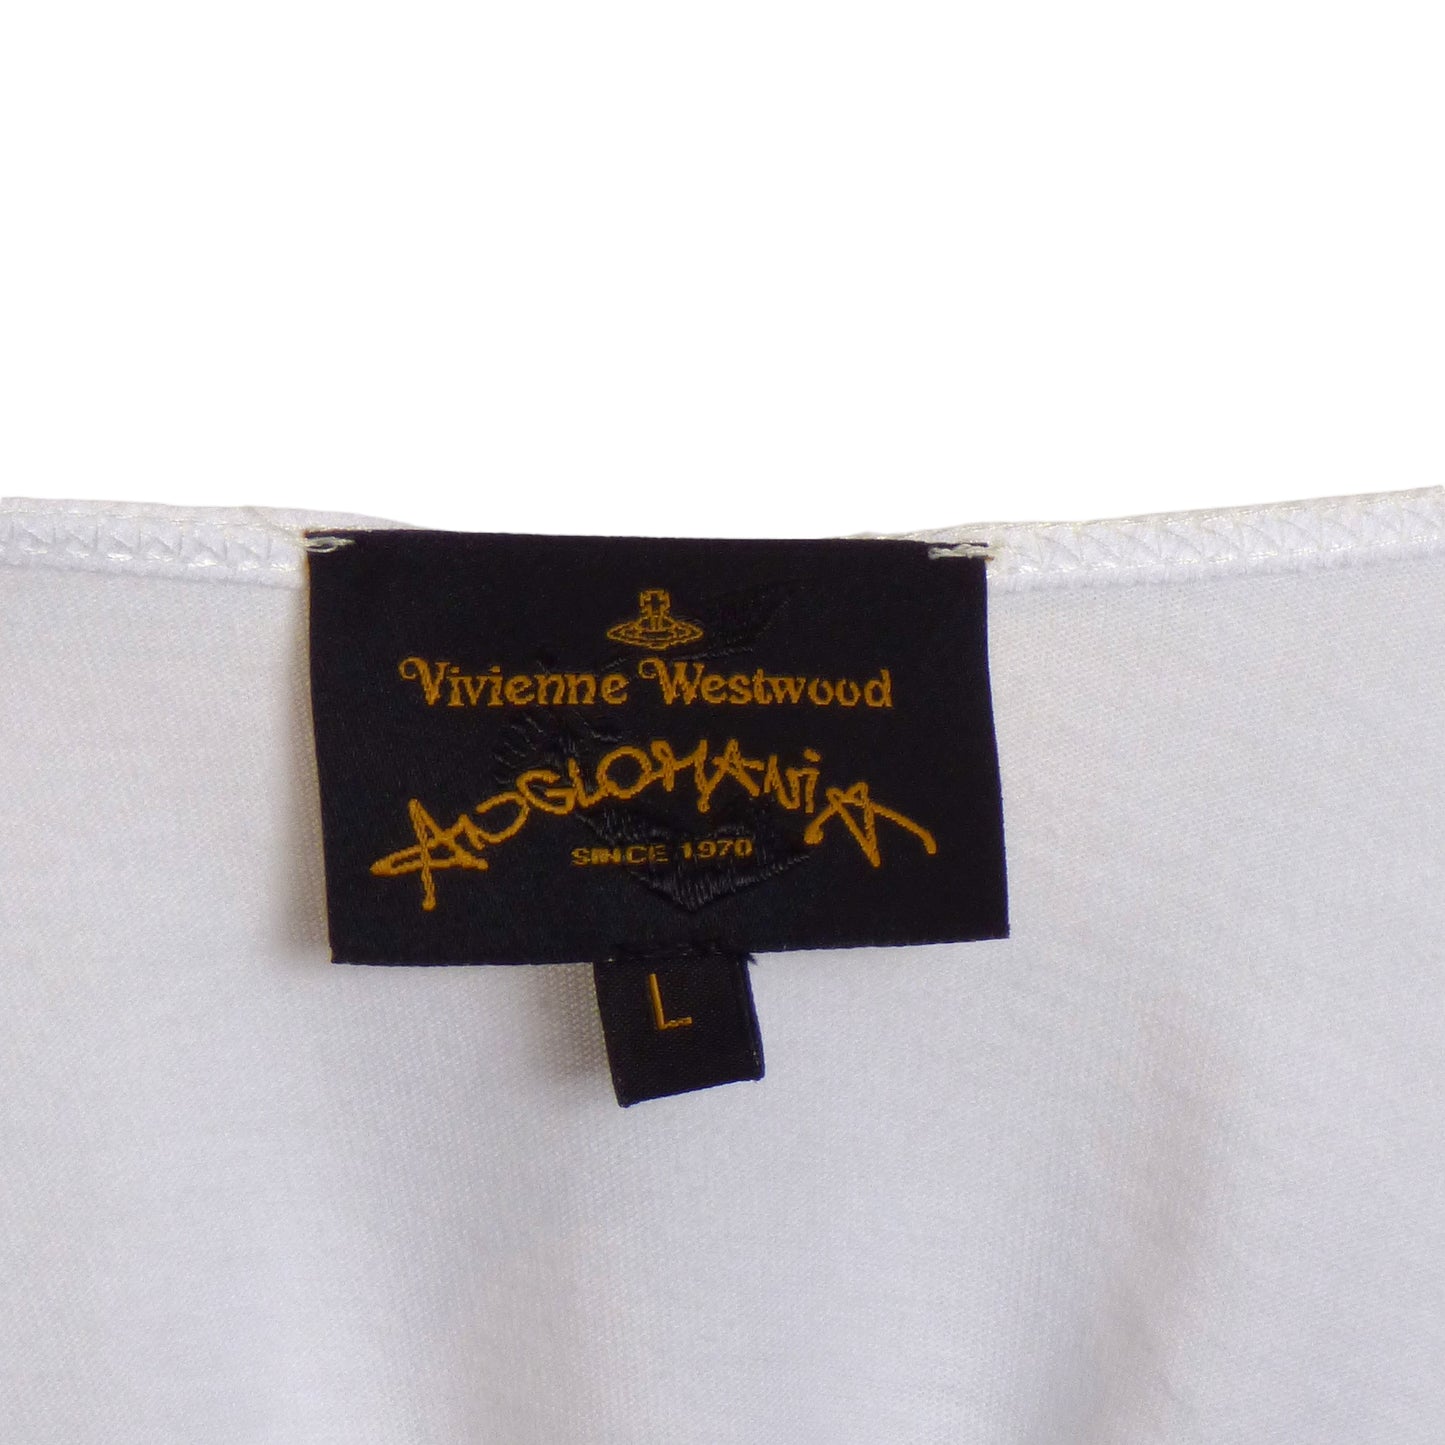 VIVIENNE WESTWOOD ANGLOMANIA- Graphic Print T-Shirt, Size Large